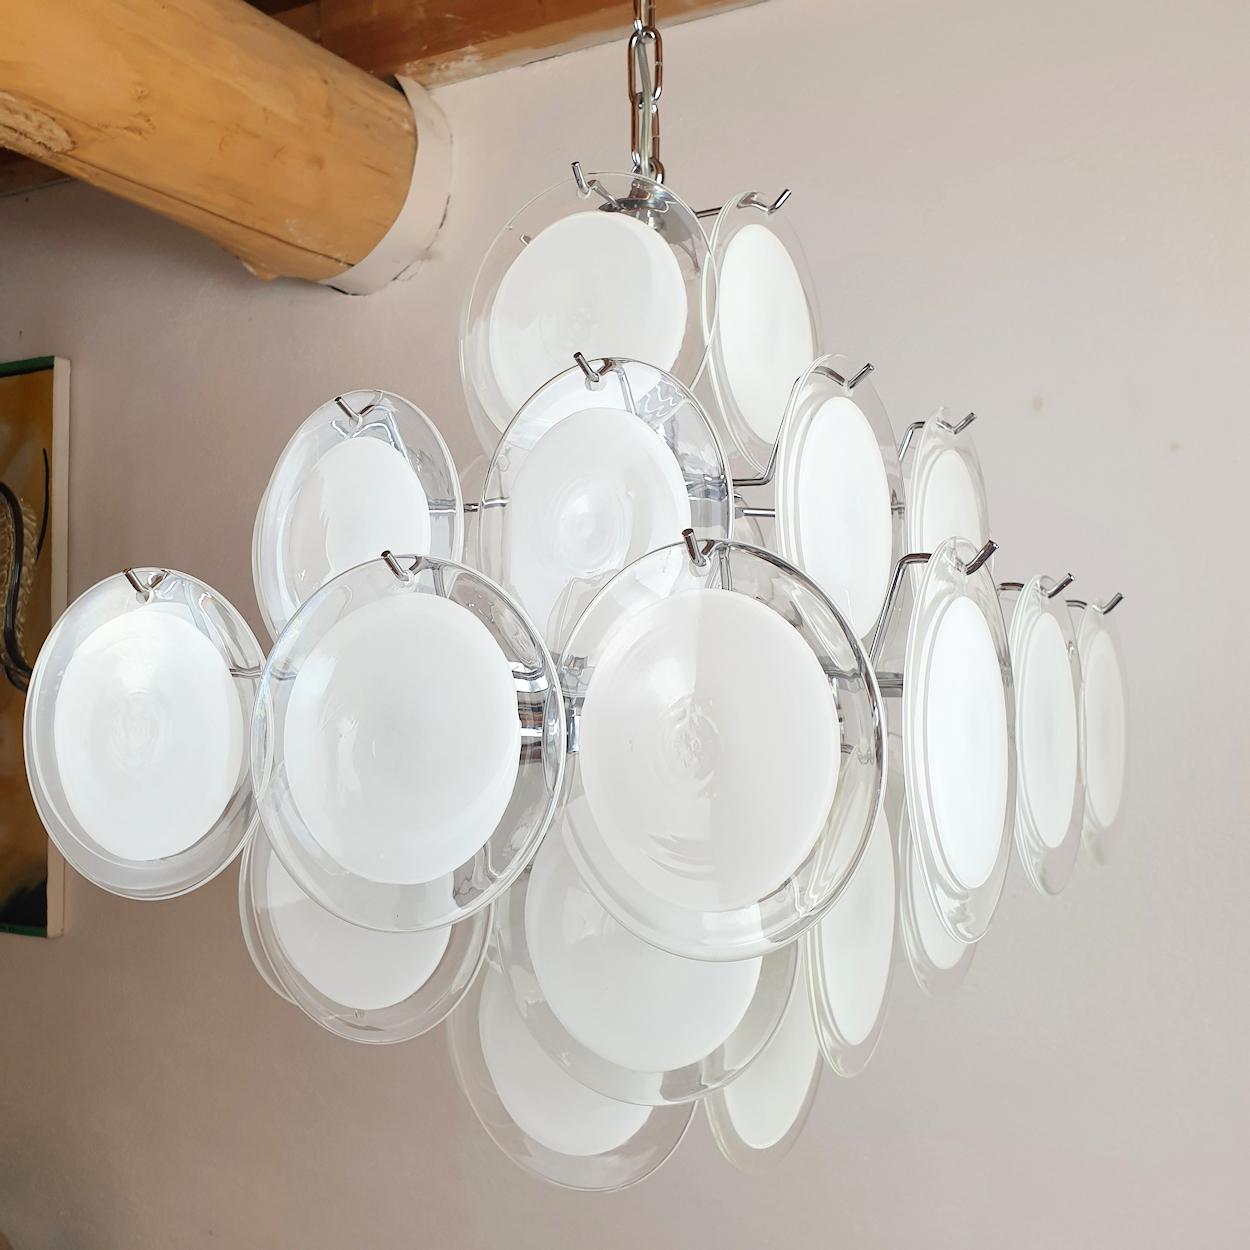 Late 20th Century White & Clear Murano Glass Mid-Century Modern Disc Chandelier, Vistosi Italy 80s